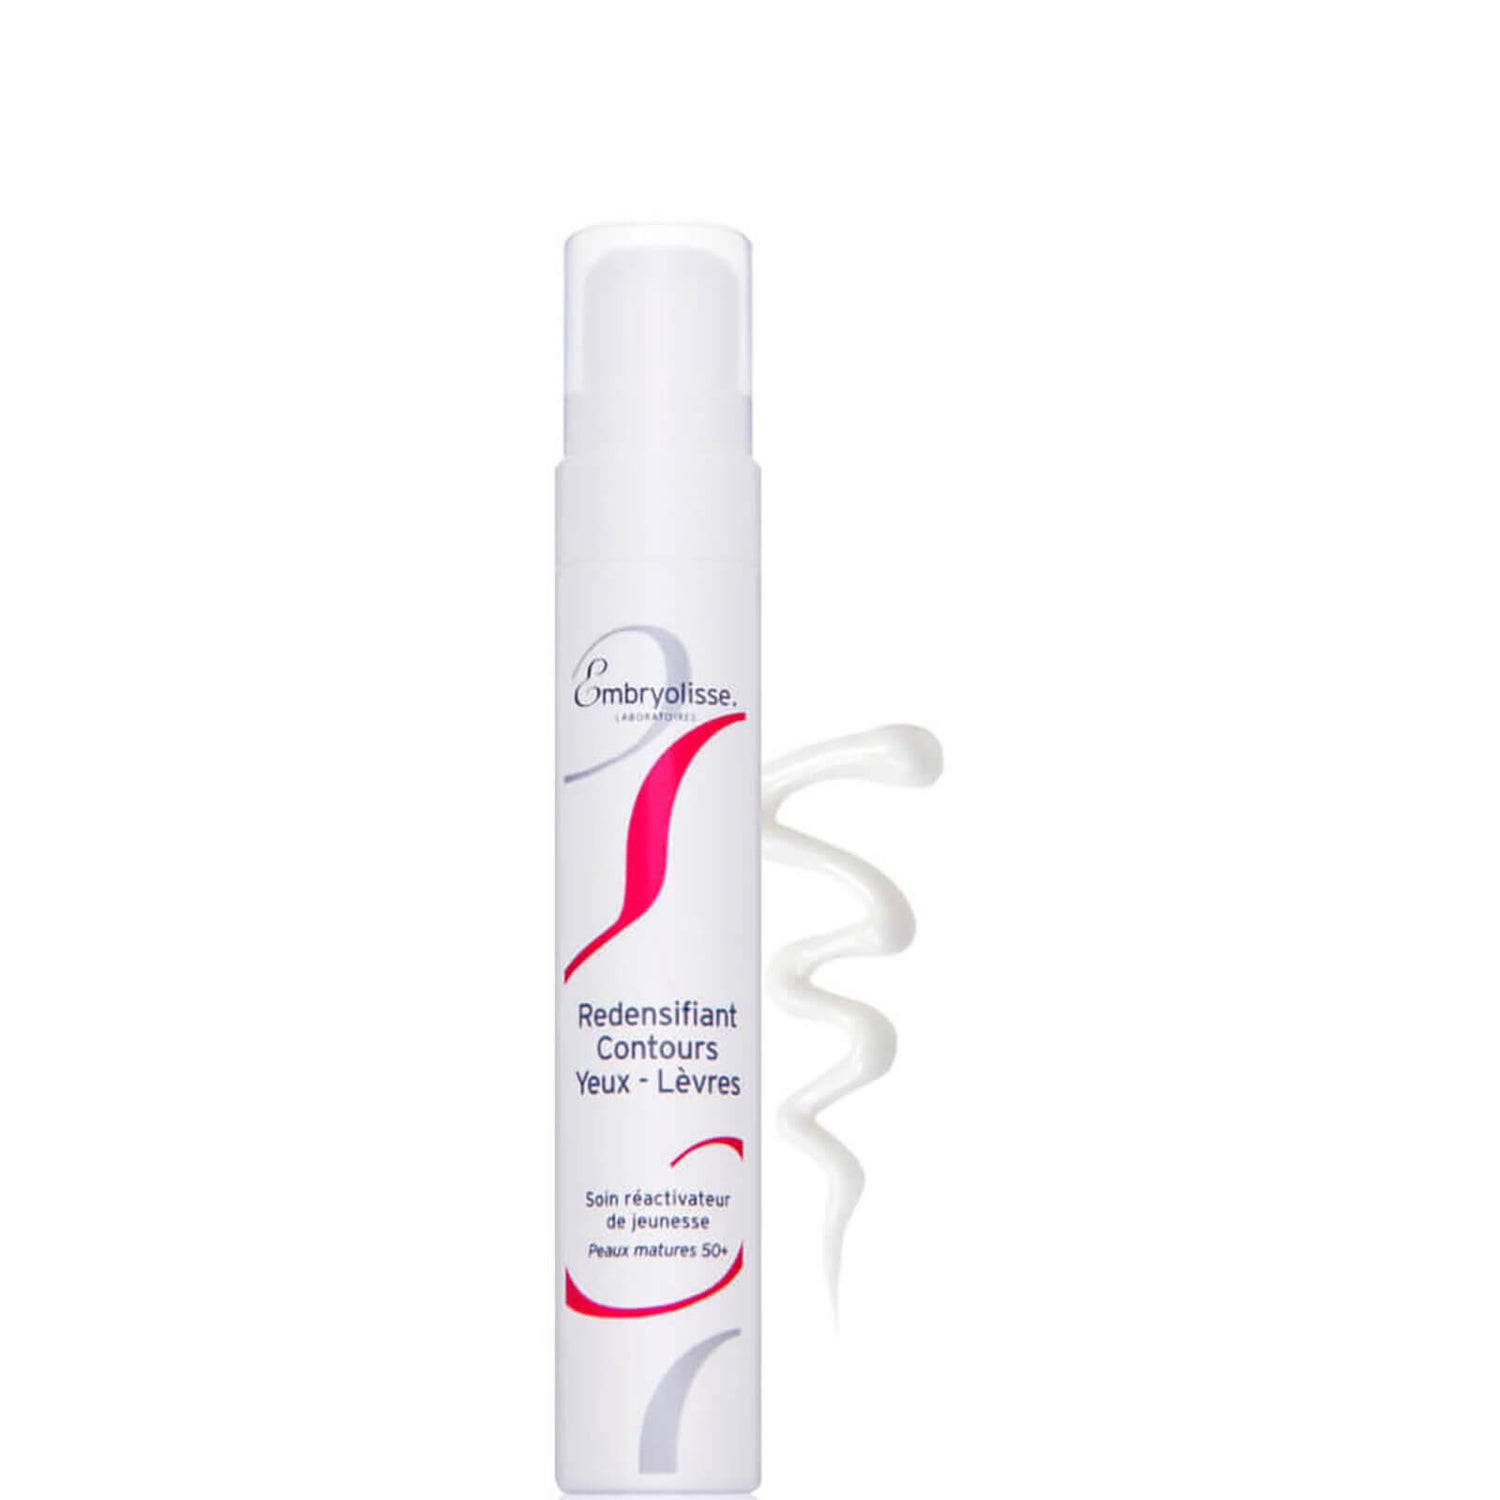 Embryolisse Redensifiant Contours Yeux-Levres - Re-Densifying Eye and Lip Contour Cream (0.5 fl. oz.)